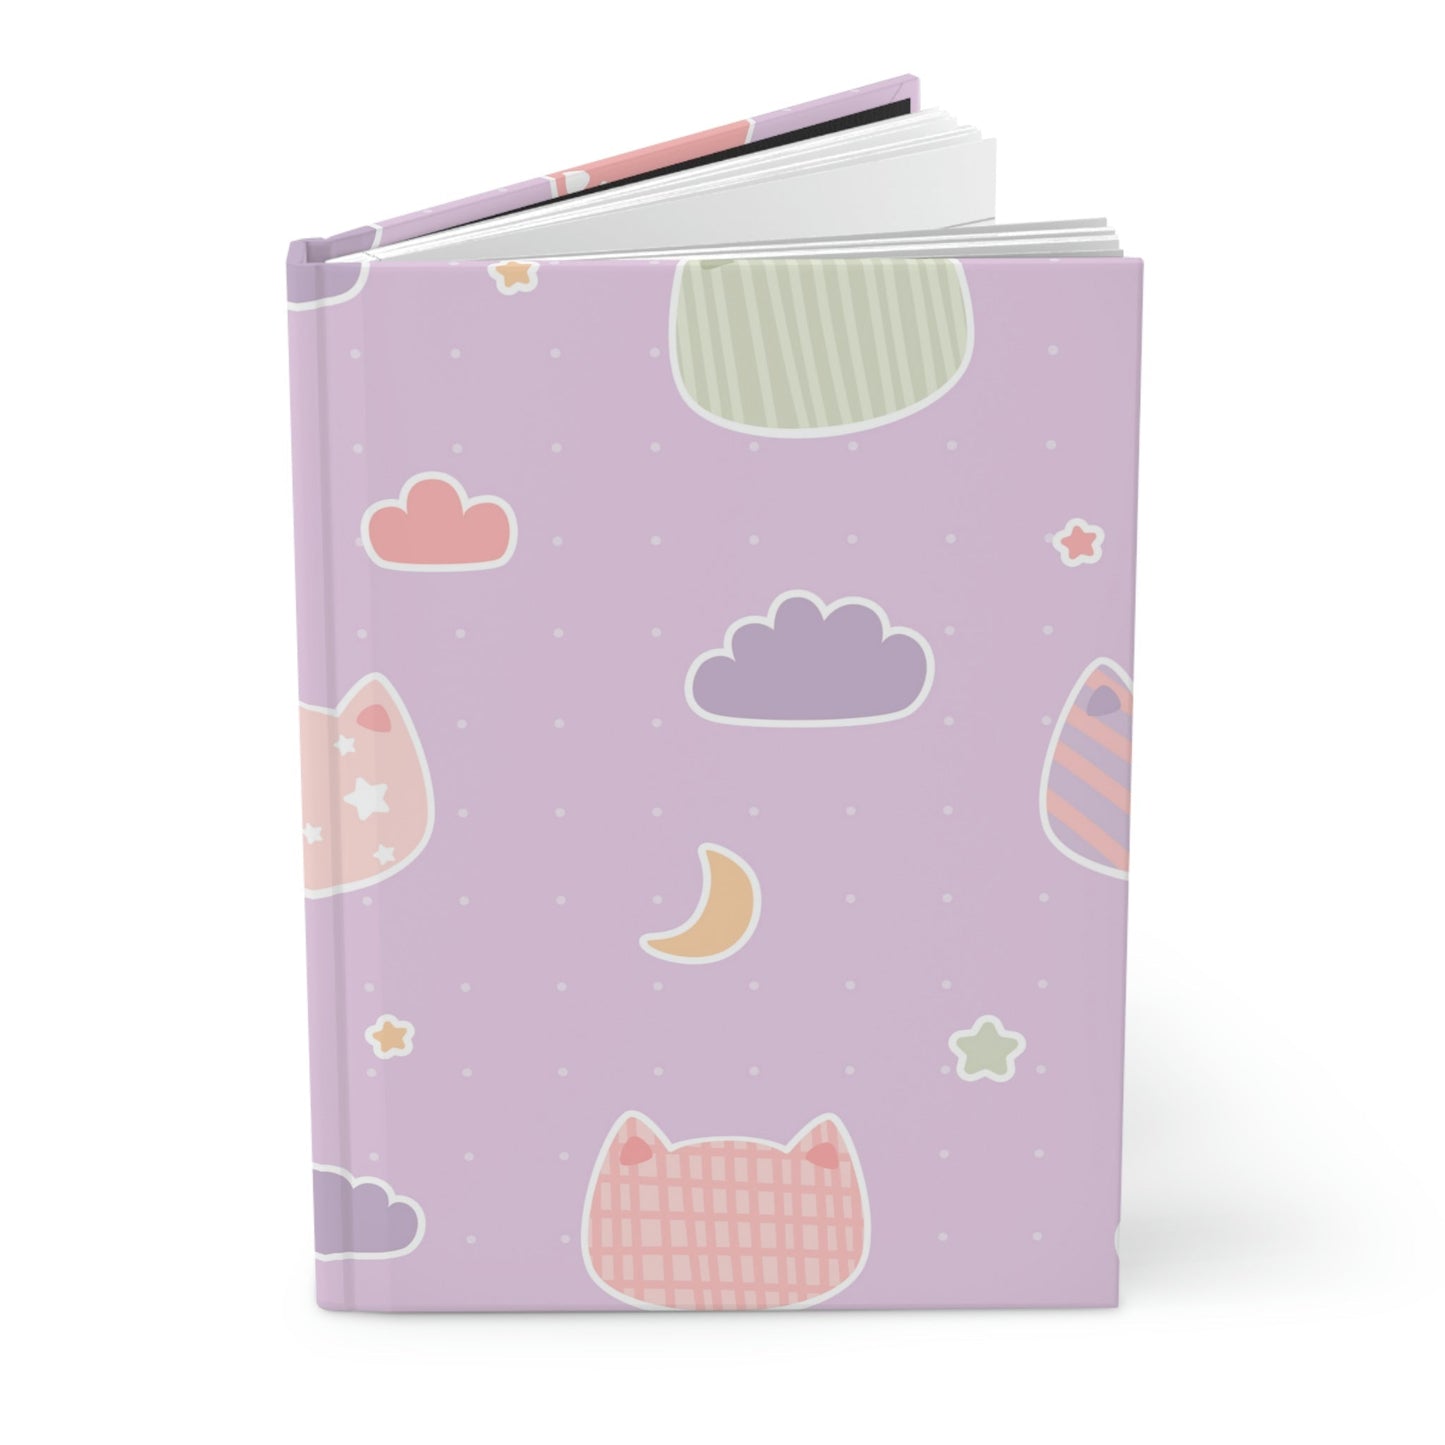 Pure Kawaii Hardcover Matte Journal Paper products Pink Sweetheart